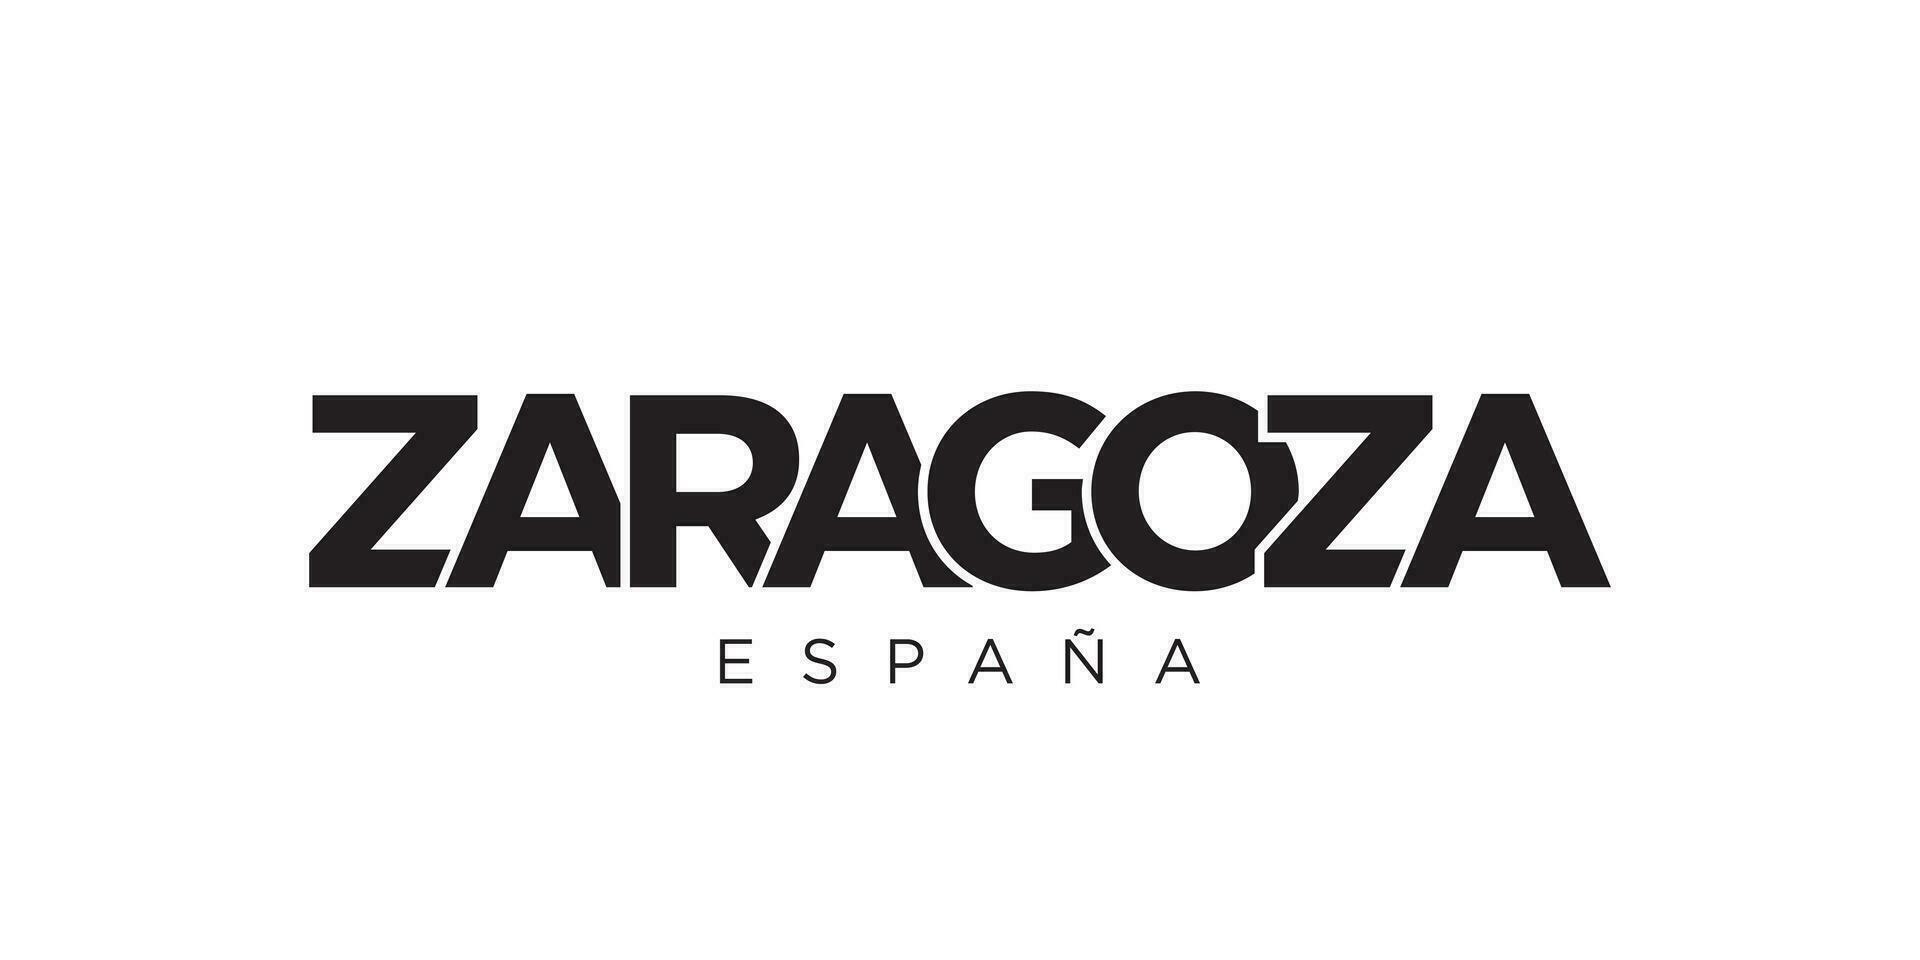 Zaragoza in the Spain emblem. The design features a geometric style, vector illustration with bold typography in a modern font. The graphic slogan lettering.